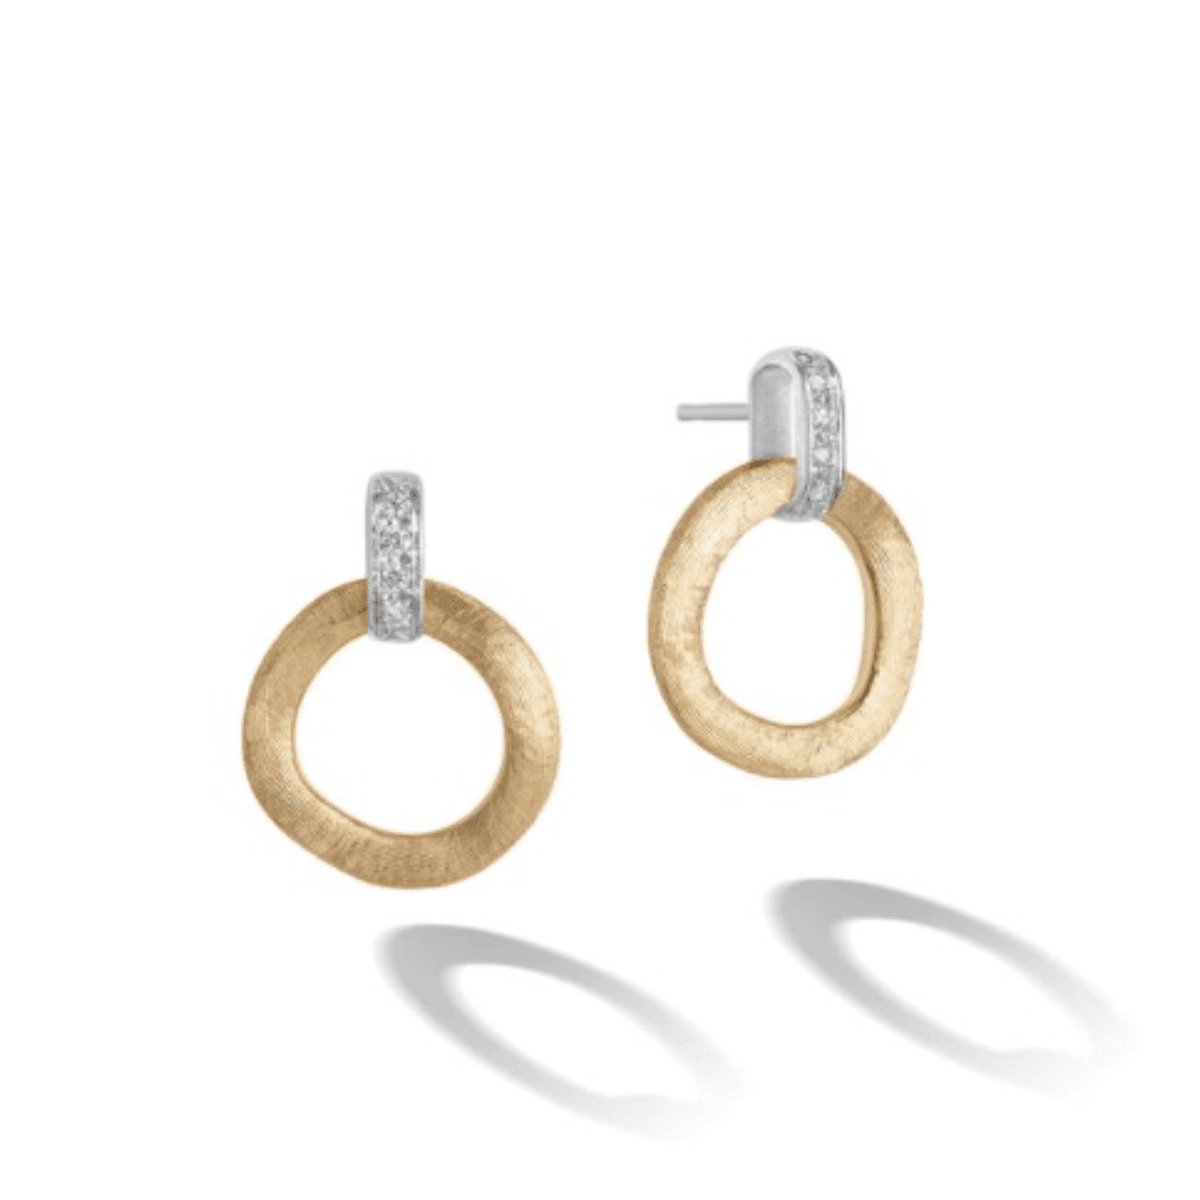 Marco Bicego Jaipur Collection 18K Yellow Gold Stud Drop Earrings with Diamonds